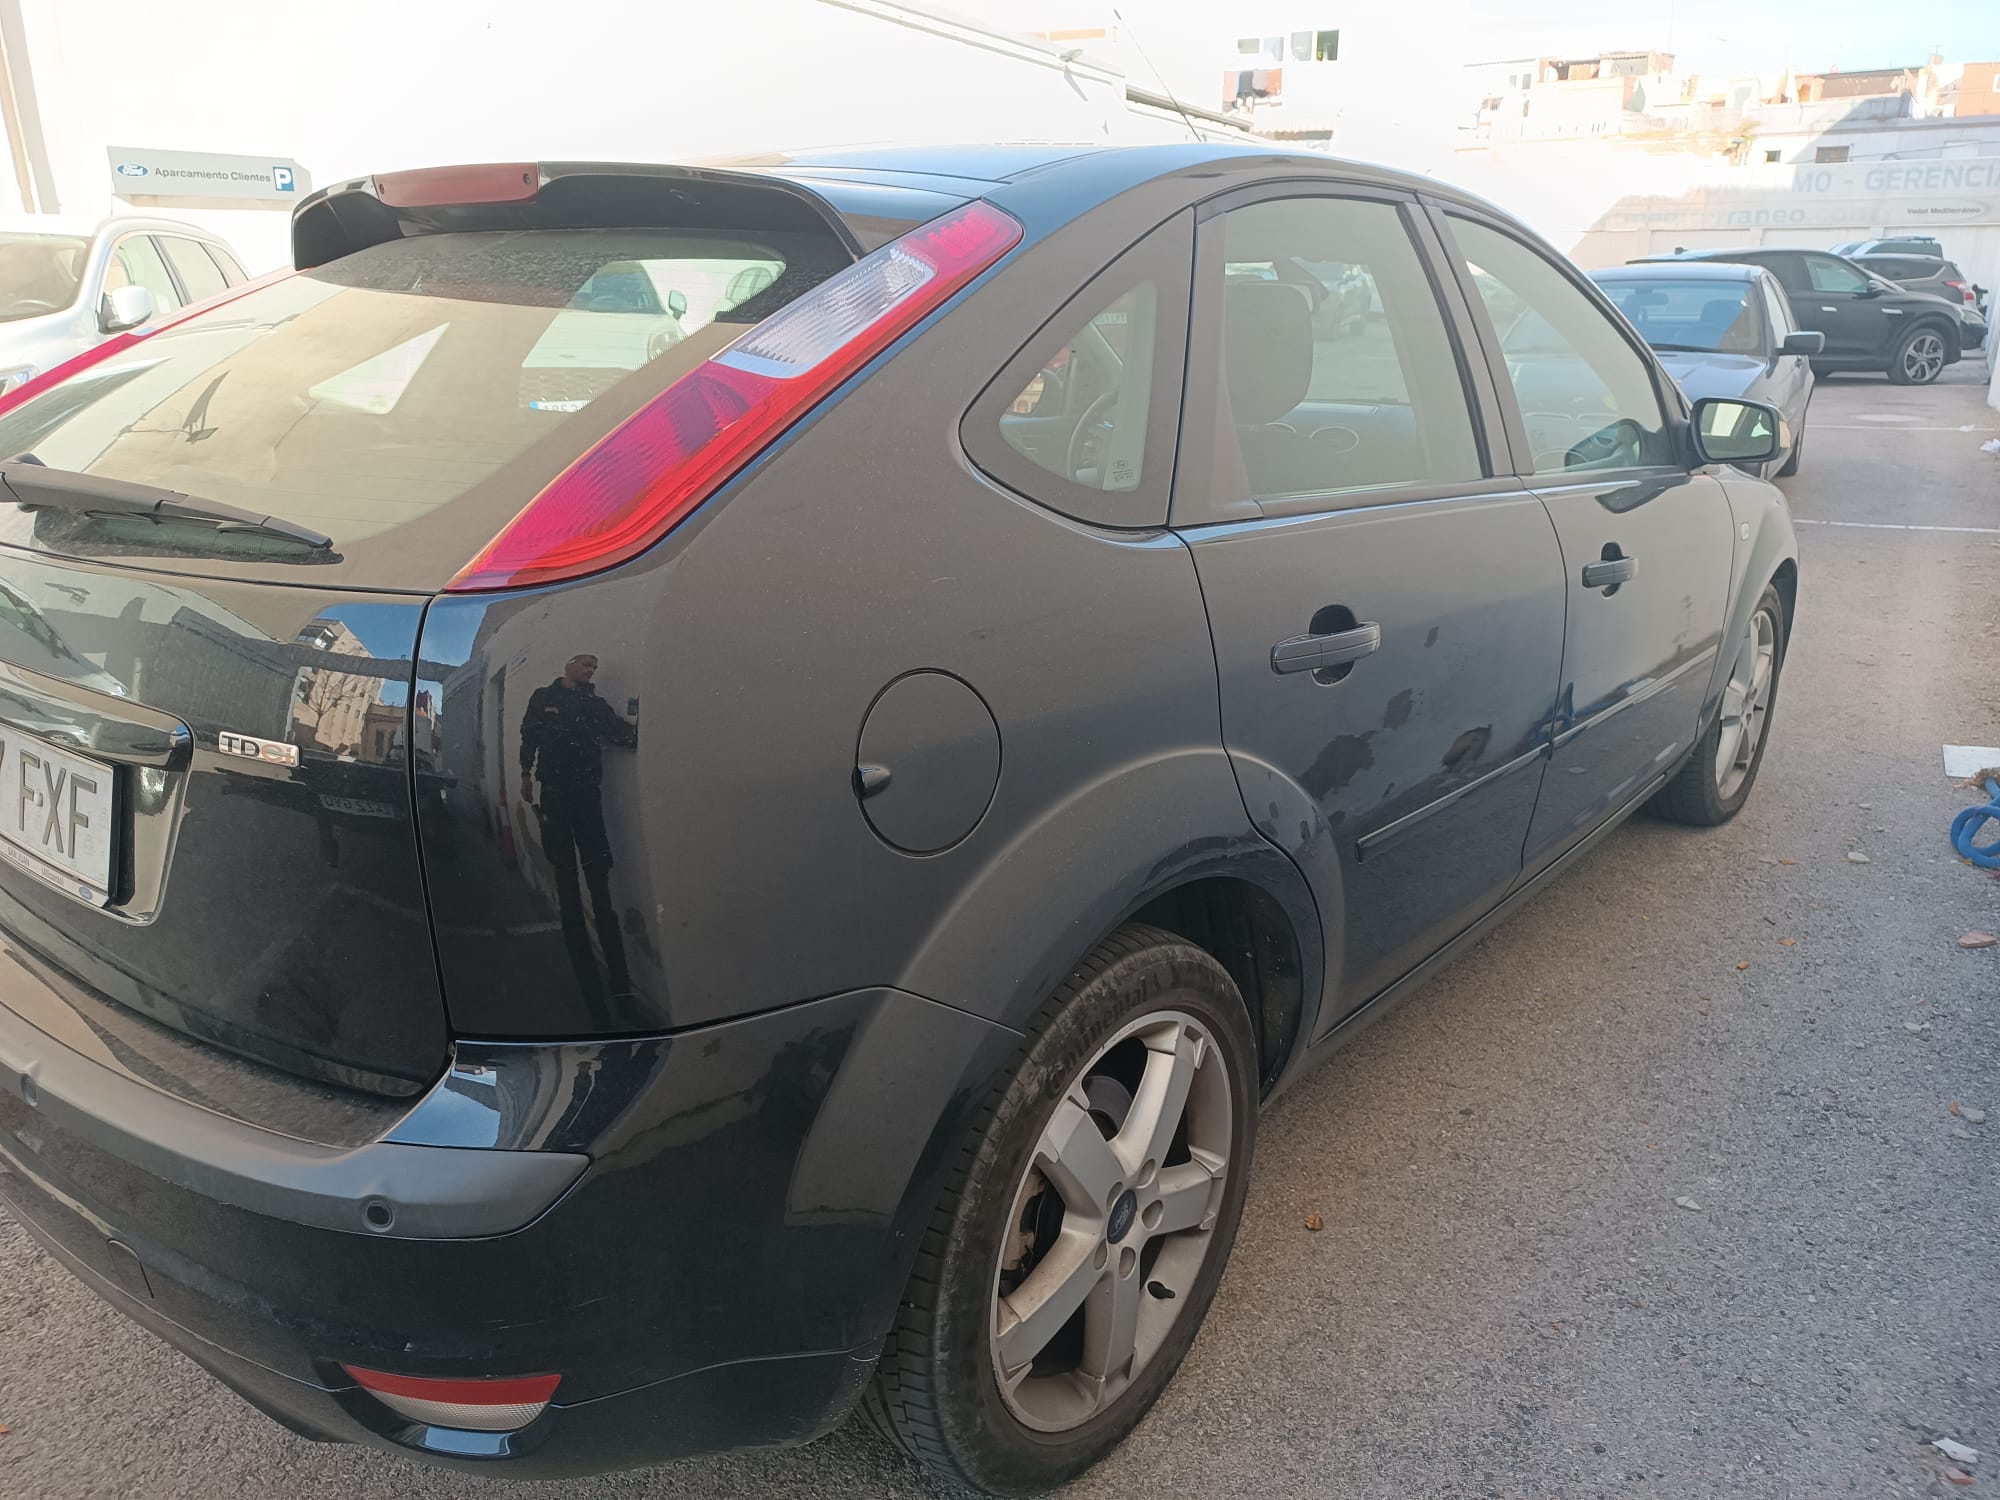 FORD Focus 2 generation (2004-2011) Другие части фар 5M5115K273AA 24857425